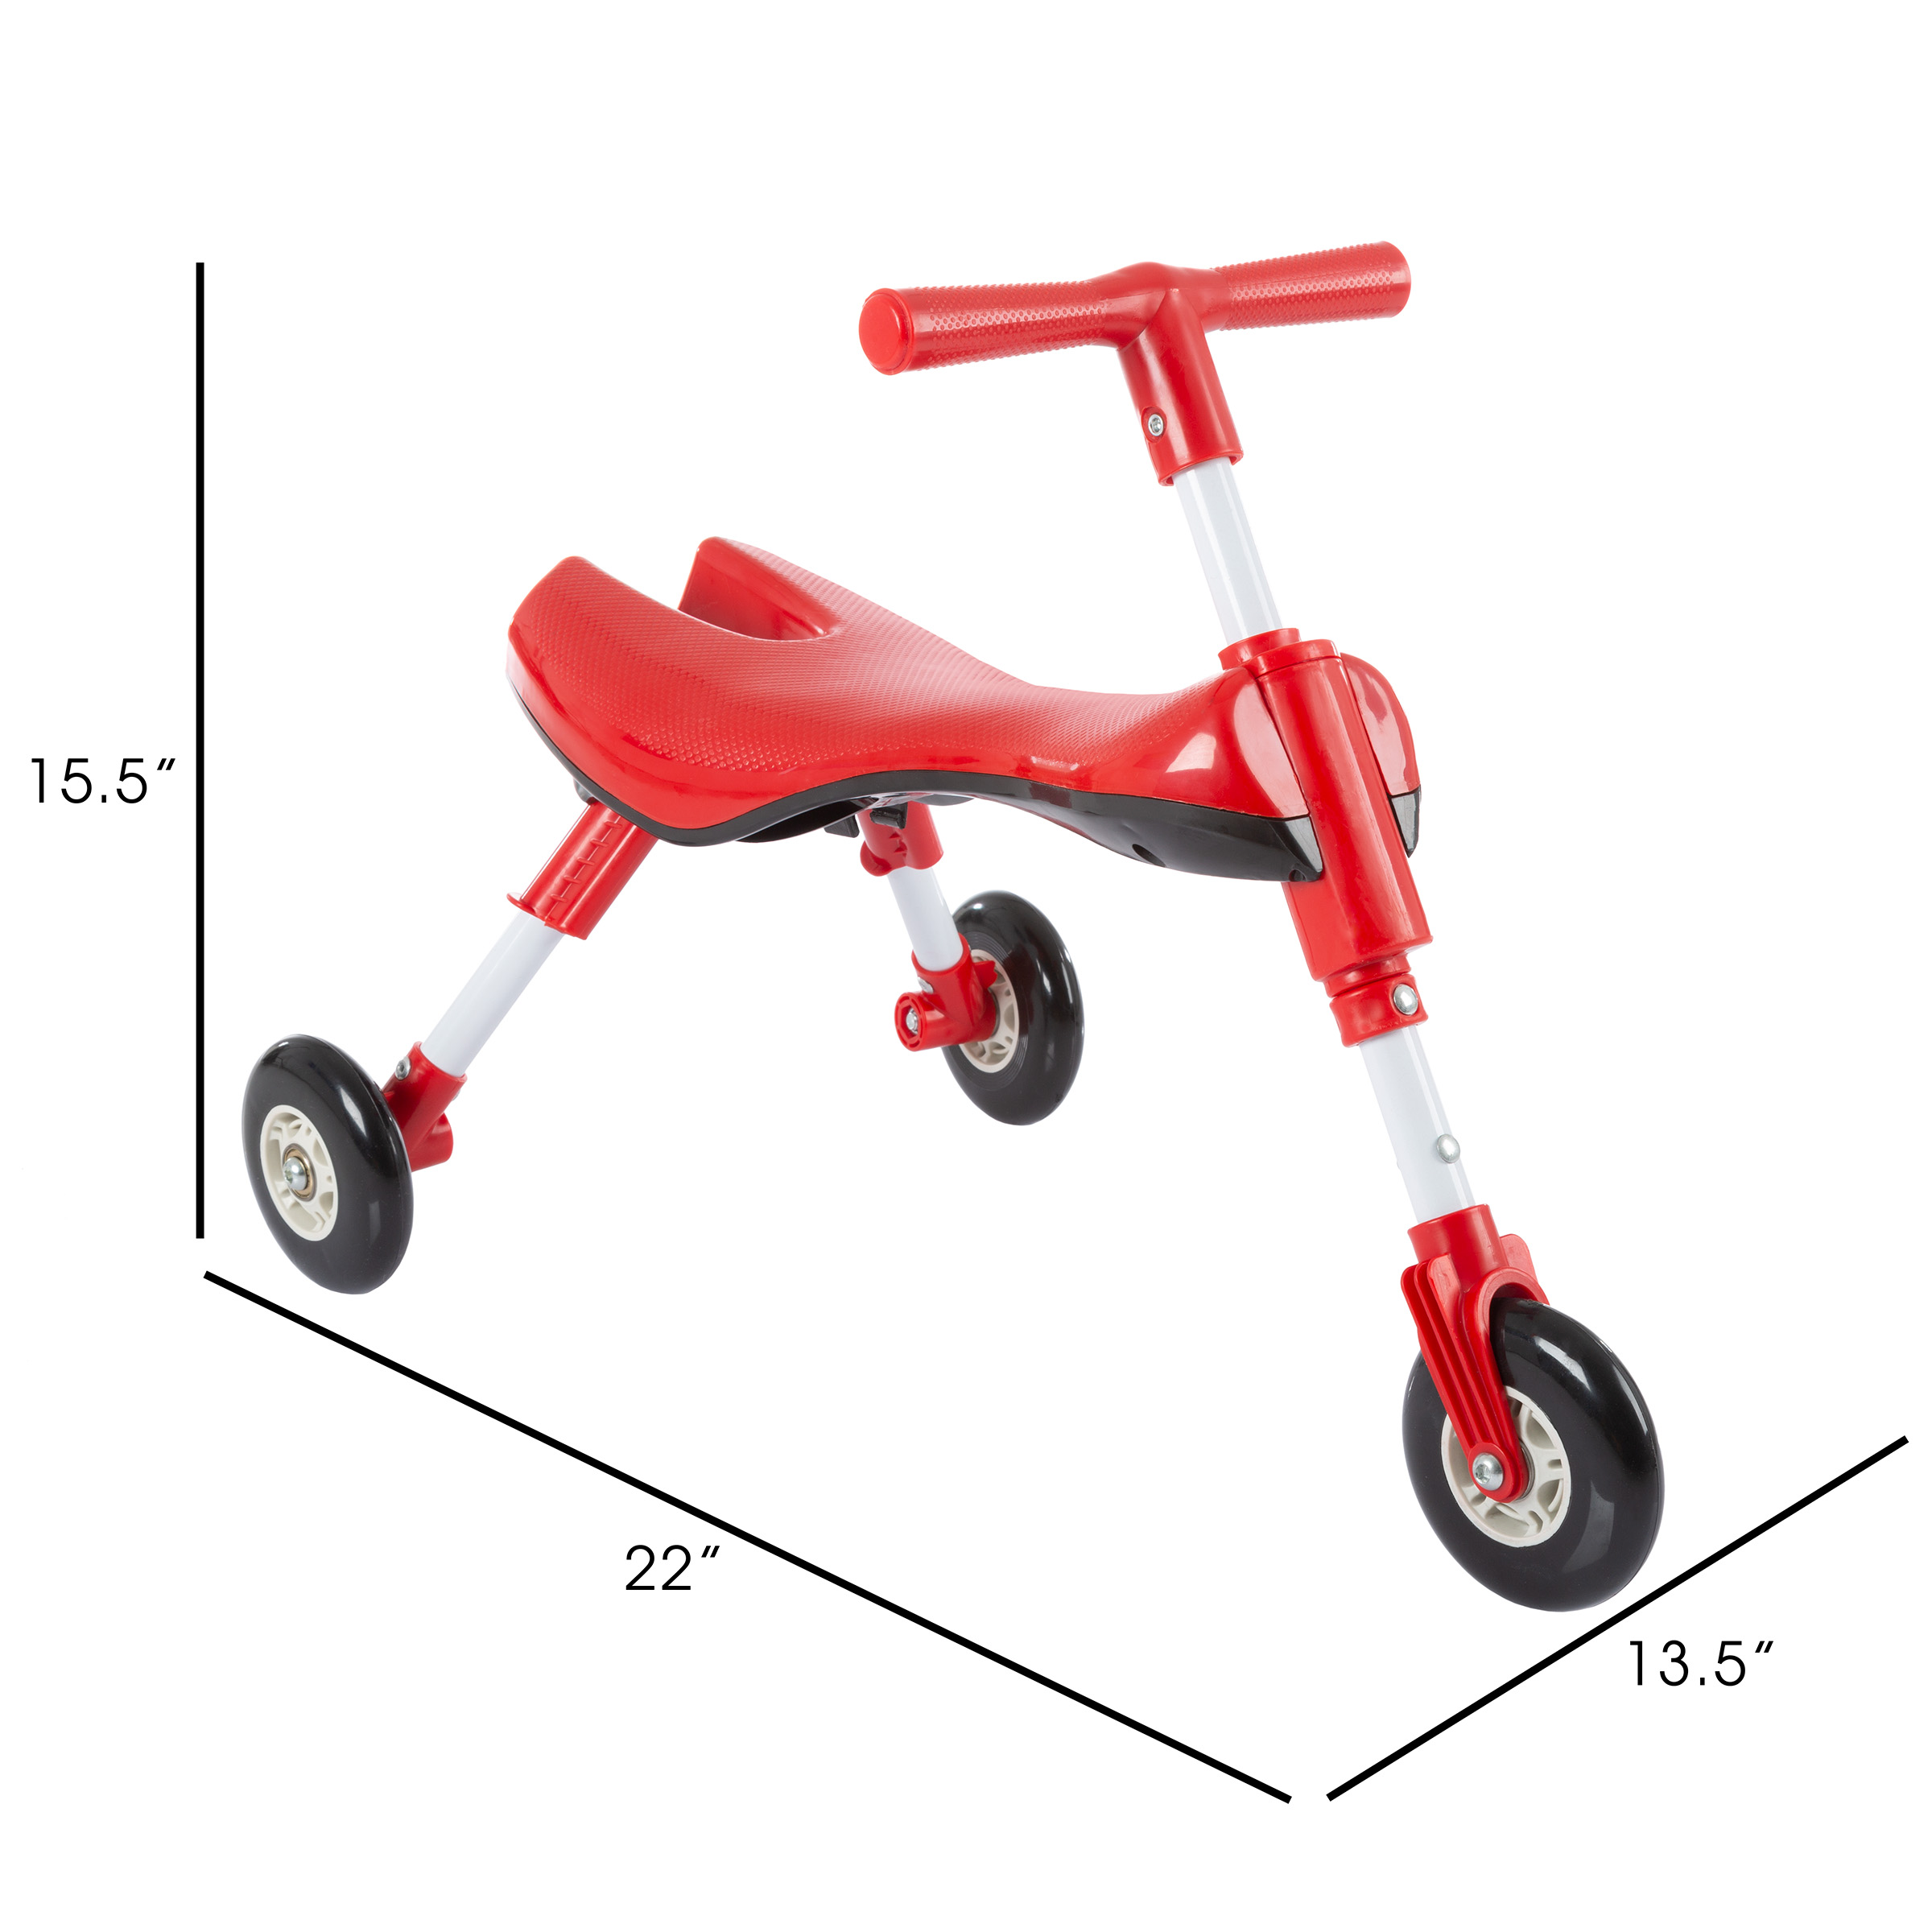 Glide Tricycle- Trike Ride On Toy with No Assembly, Foldable Design, Indoor Outdoor Wheels for Toddlers Learning to Walk, Balance by Lil’ Rider - image 2 of 7